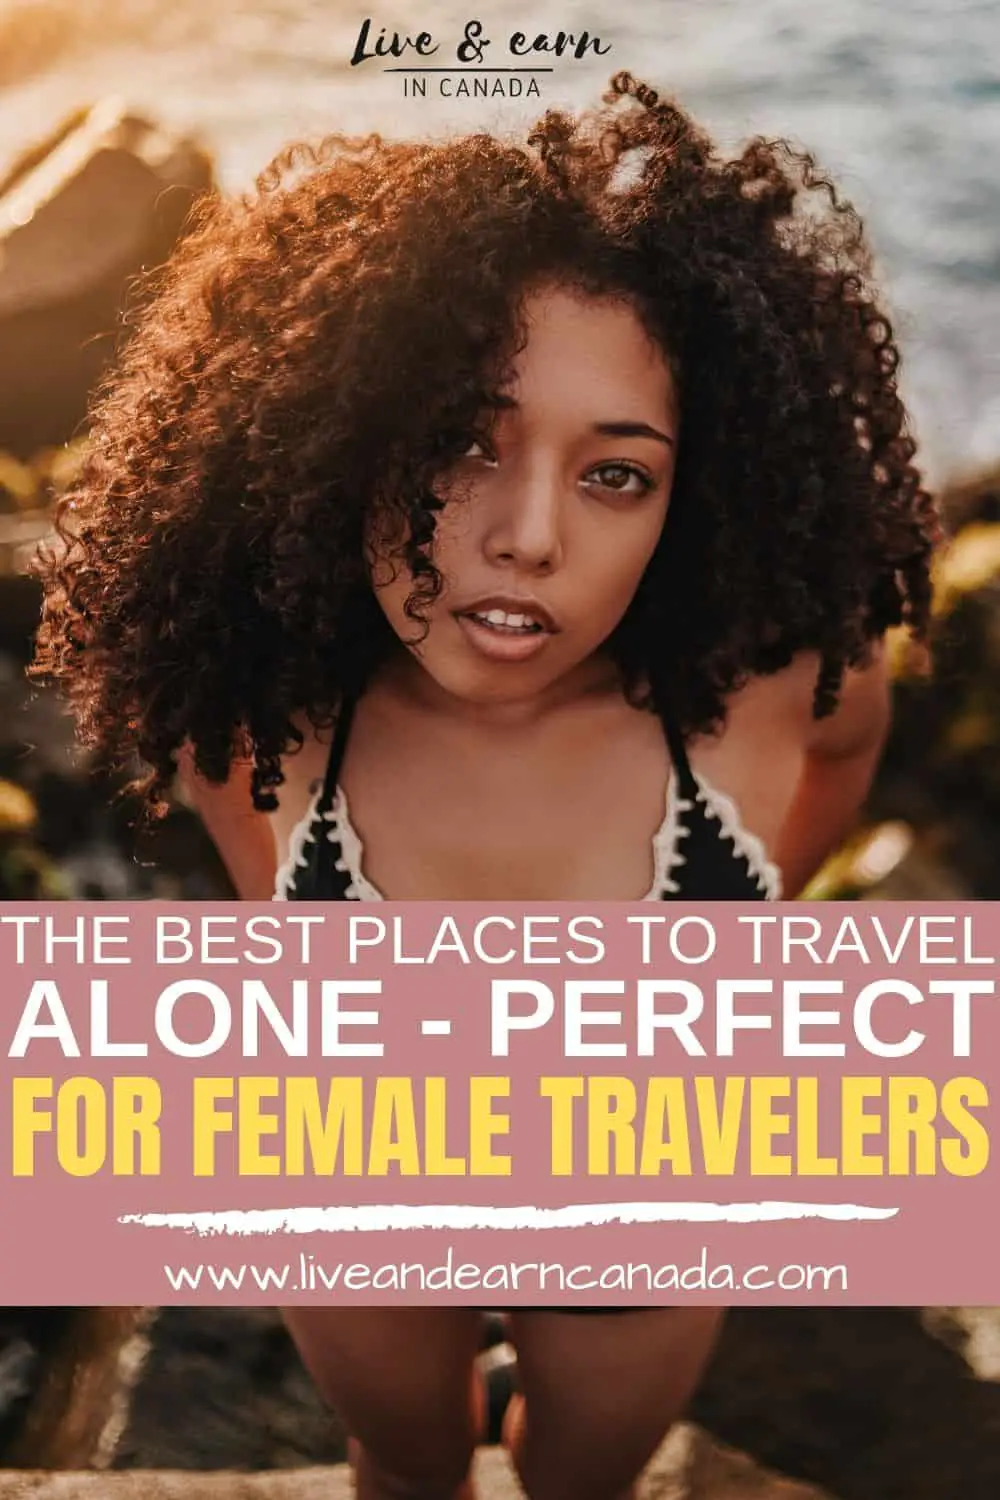 Are you looking for the best places to travel alone? Here are the best solo female travel destinations that you will totally love and enjoy! These are some of the safest places to travel alone as a female traveler! #solotravel #destinationlocations #femaletraveler